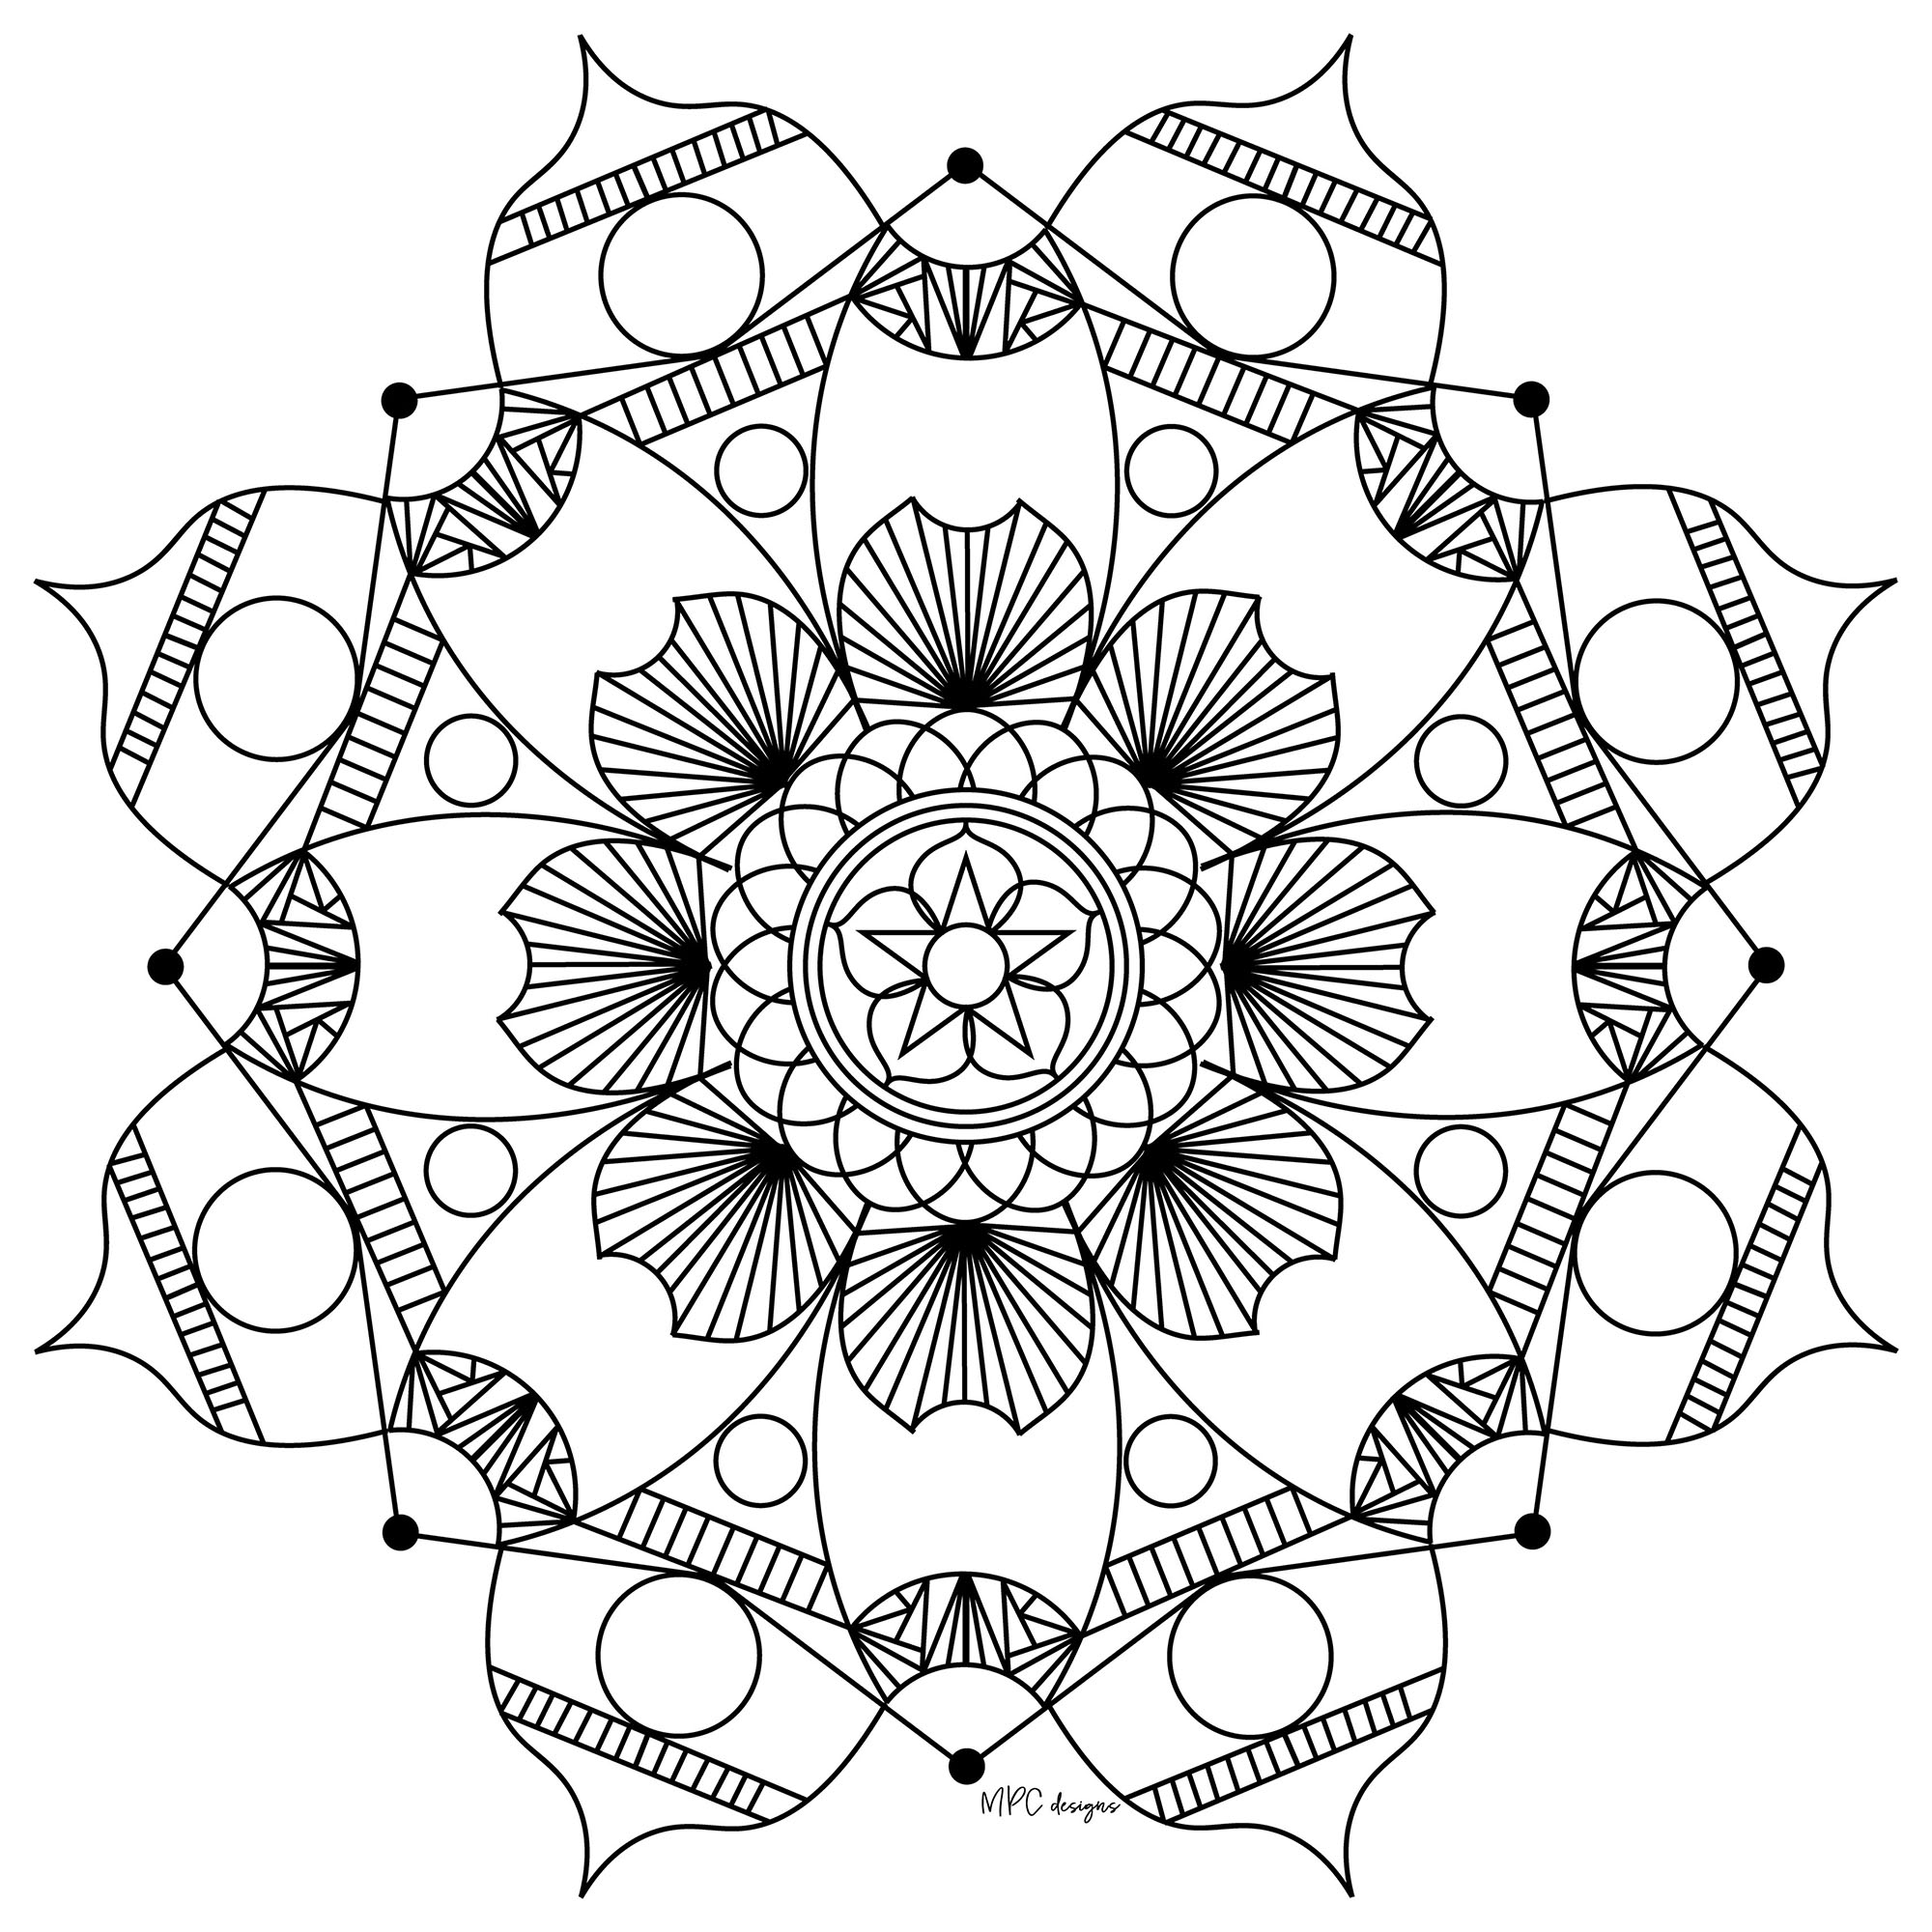 If you are looking for a Mandala not too complicated to color, but still with a relative difficulty level, this one is perfect for you. Do whatever it takes to get rid of any distractions that may interfere with your coloring.